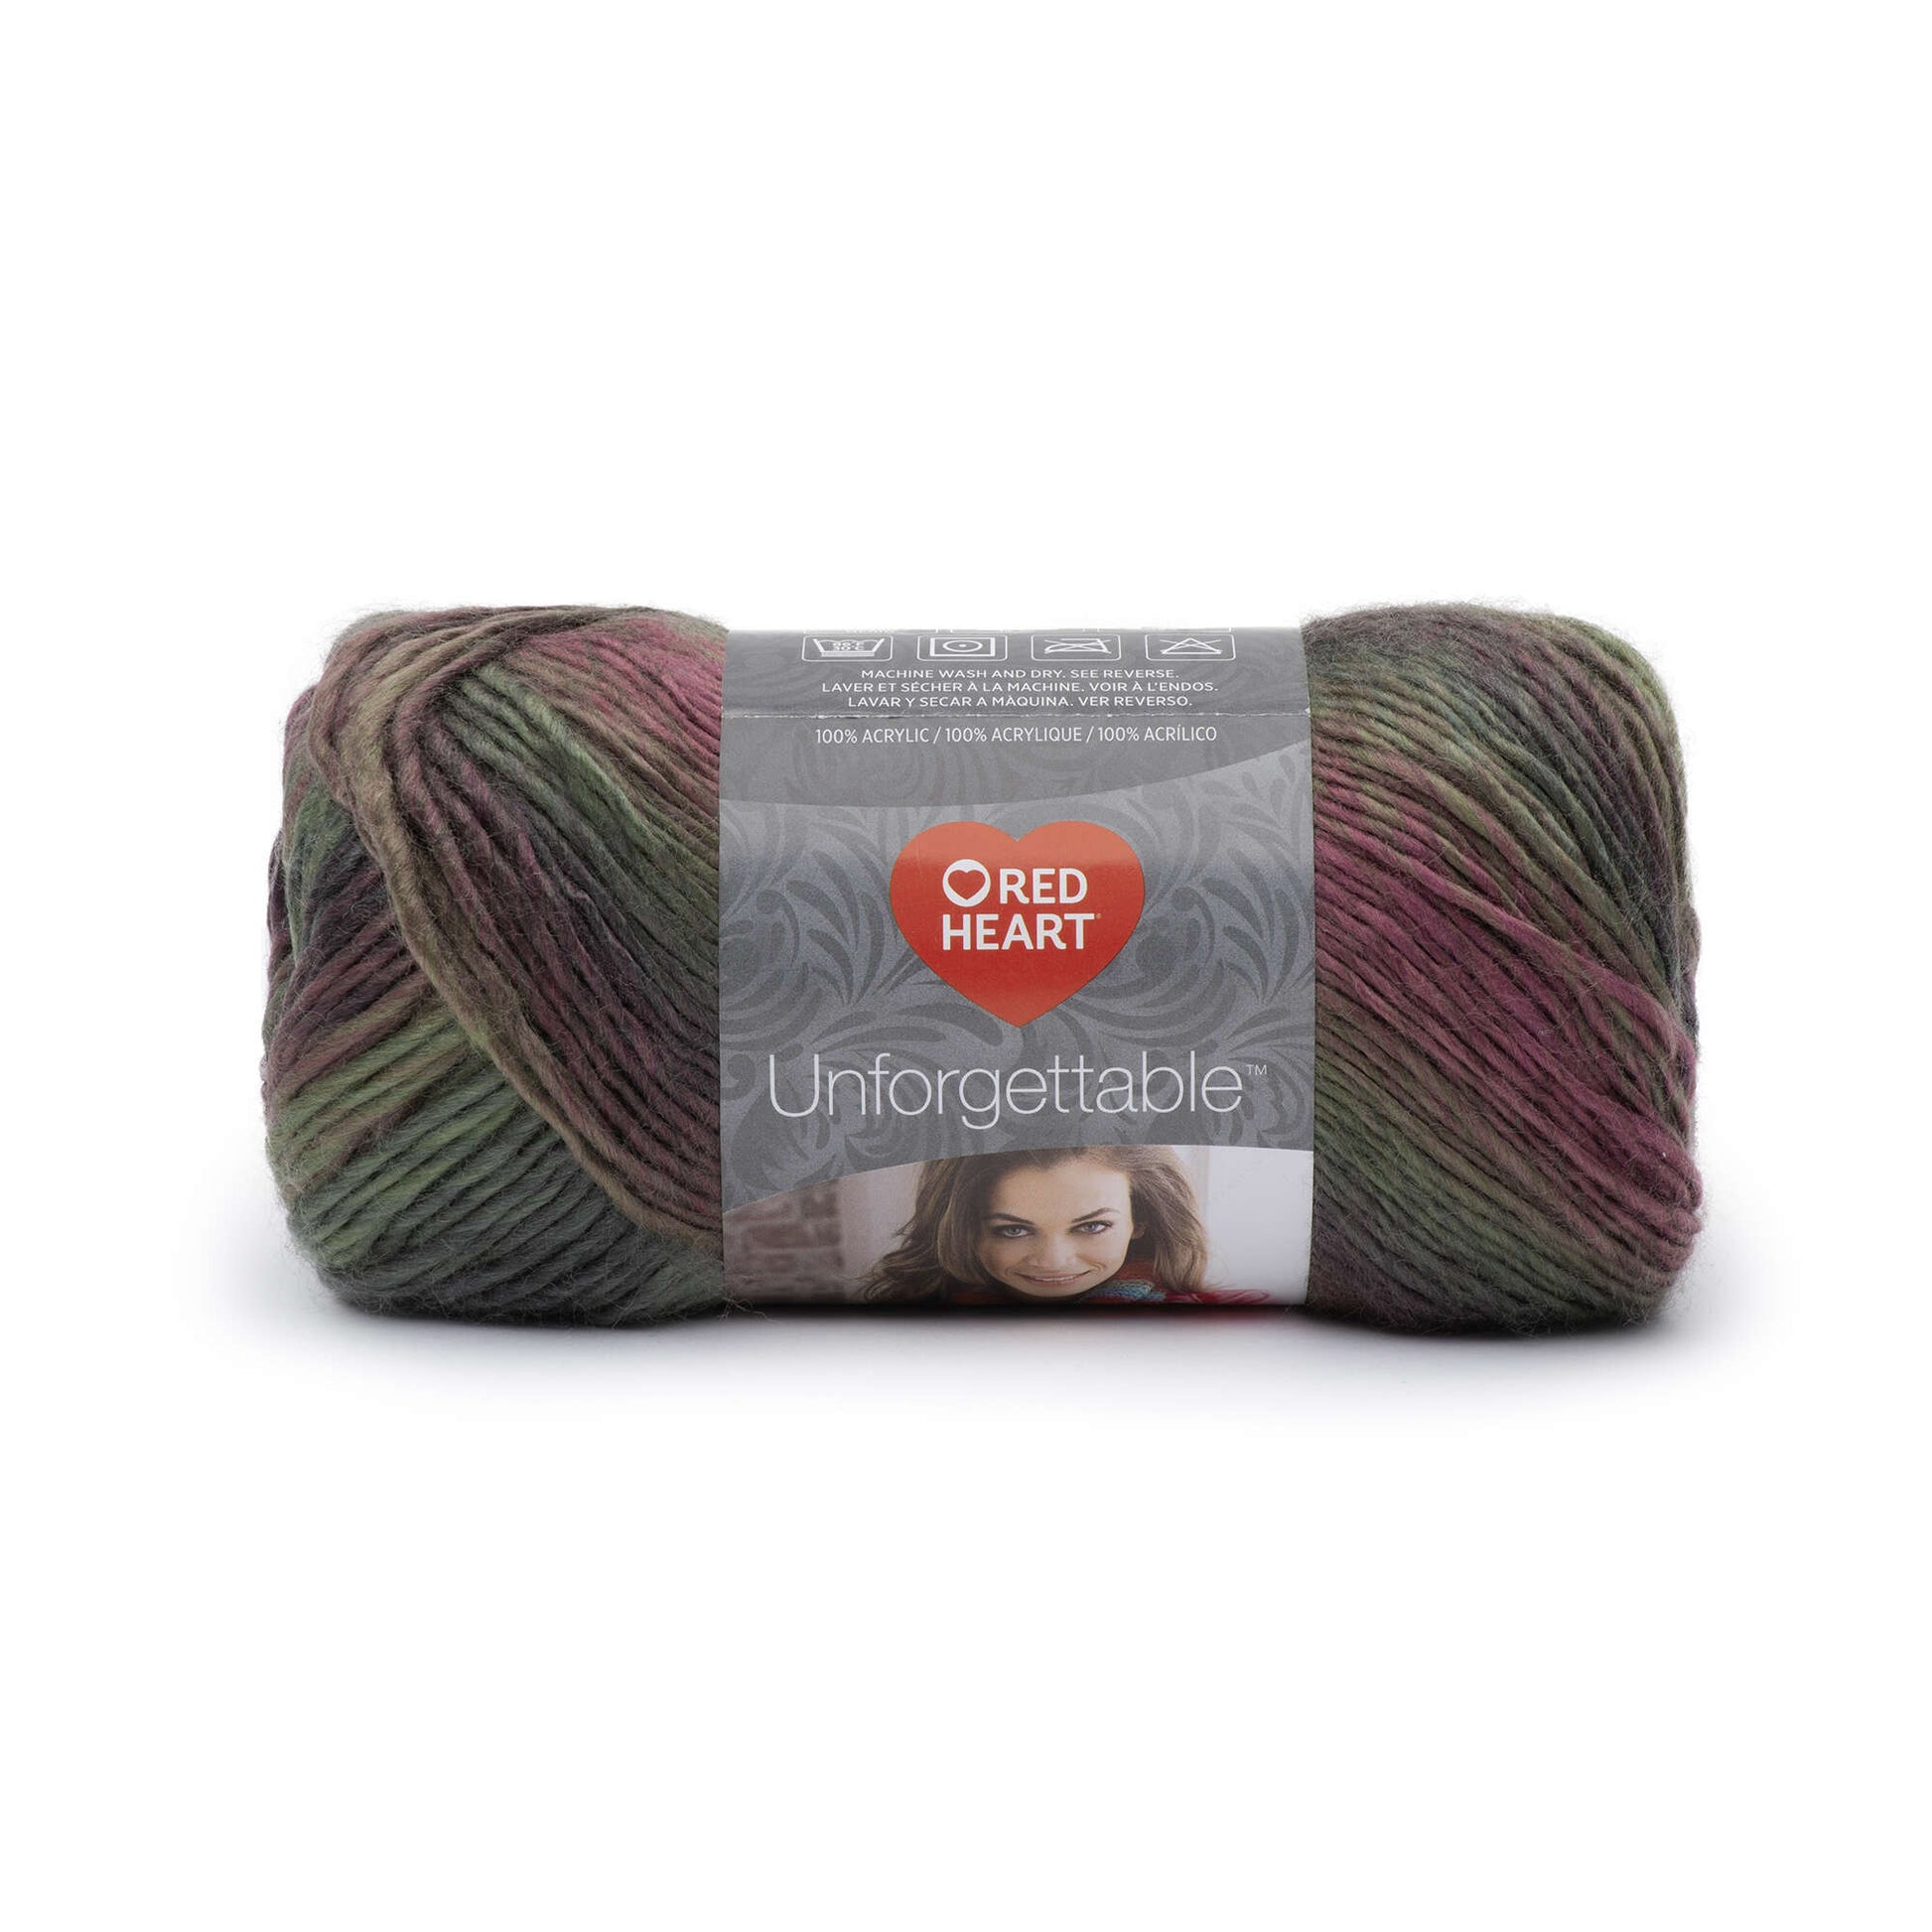 Red Heart All In One Granny Square Yarn (250g/8.8oz